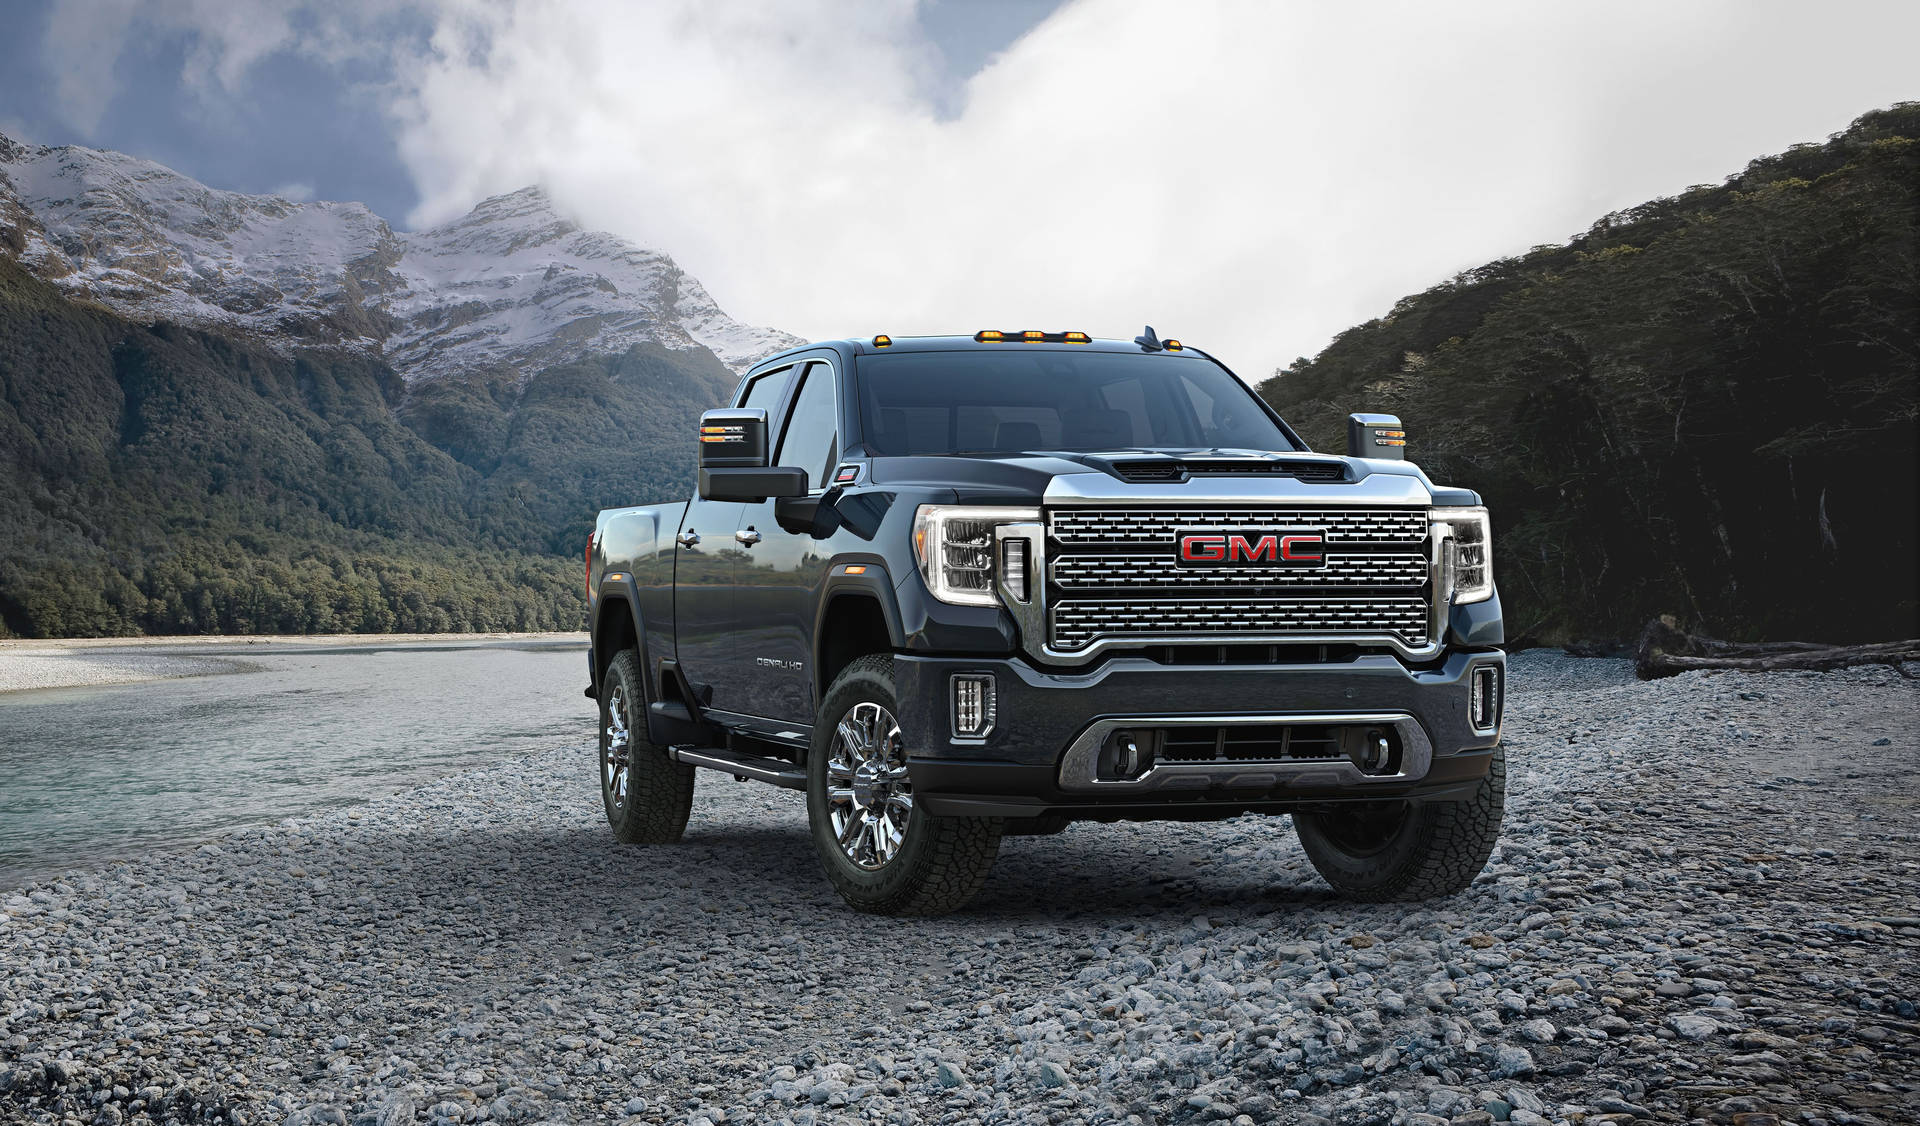 Rugged Power Meets Gracious Style - Gmc Pickup Truck